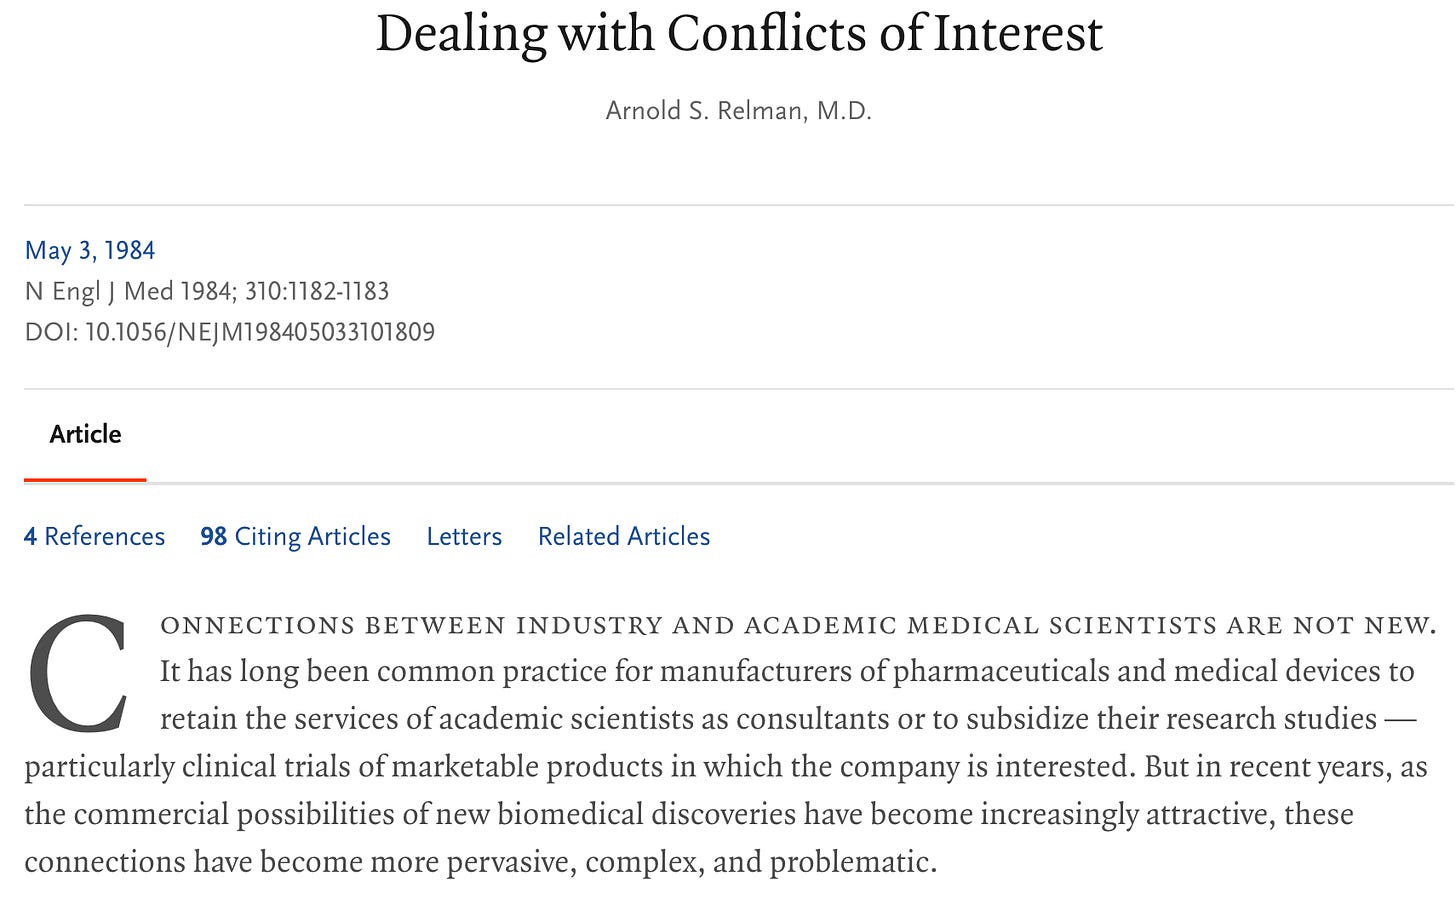 Conflicts of Interest in Science